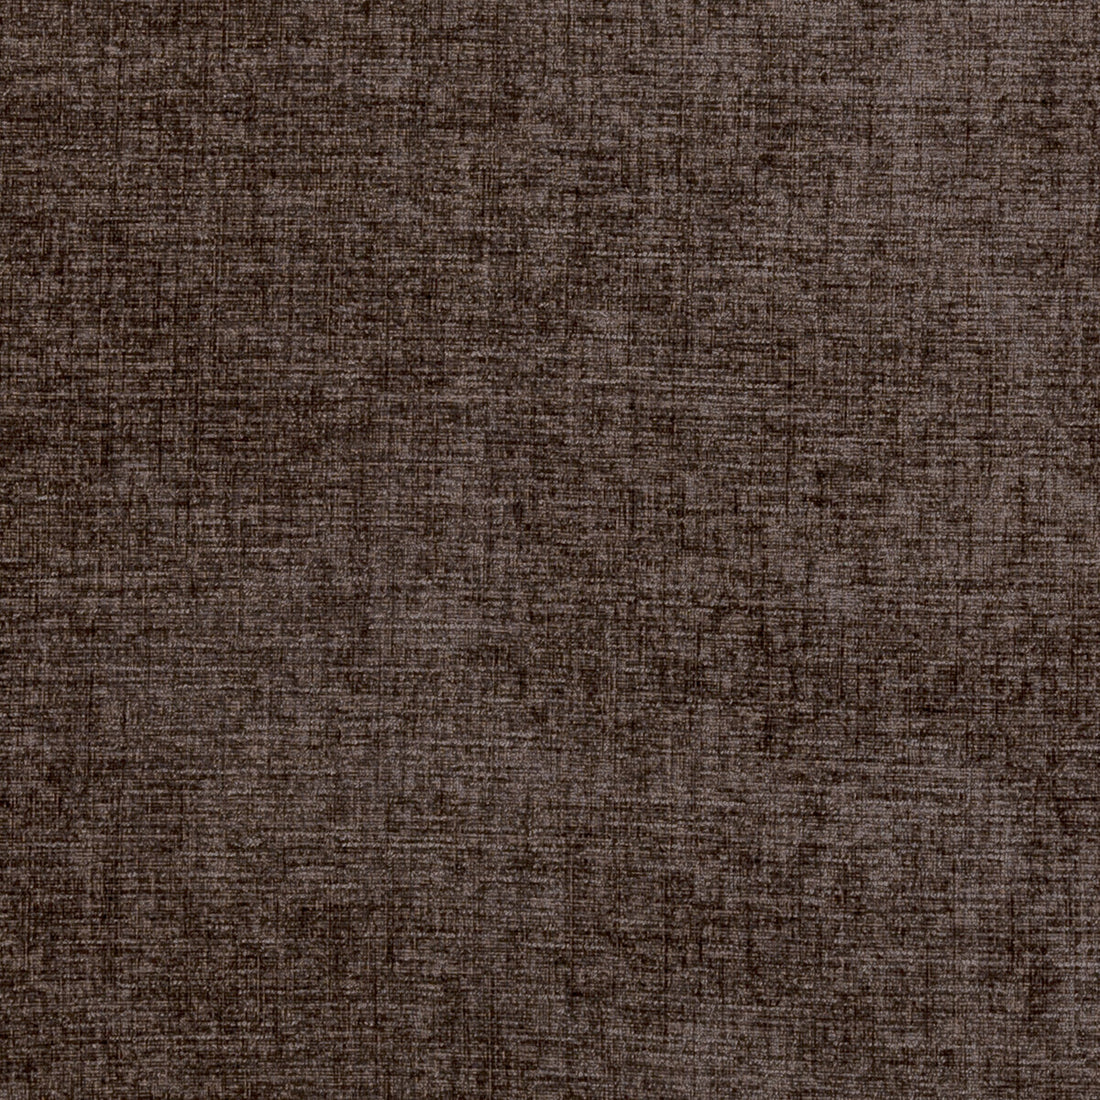 Karina fabric in gunmetal color - pattern F0371/17.CAC.0 - by Clarke And Clarke in the Clarke &amp; Clarke Karina collection